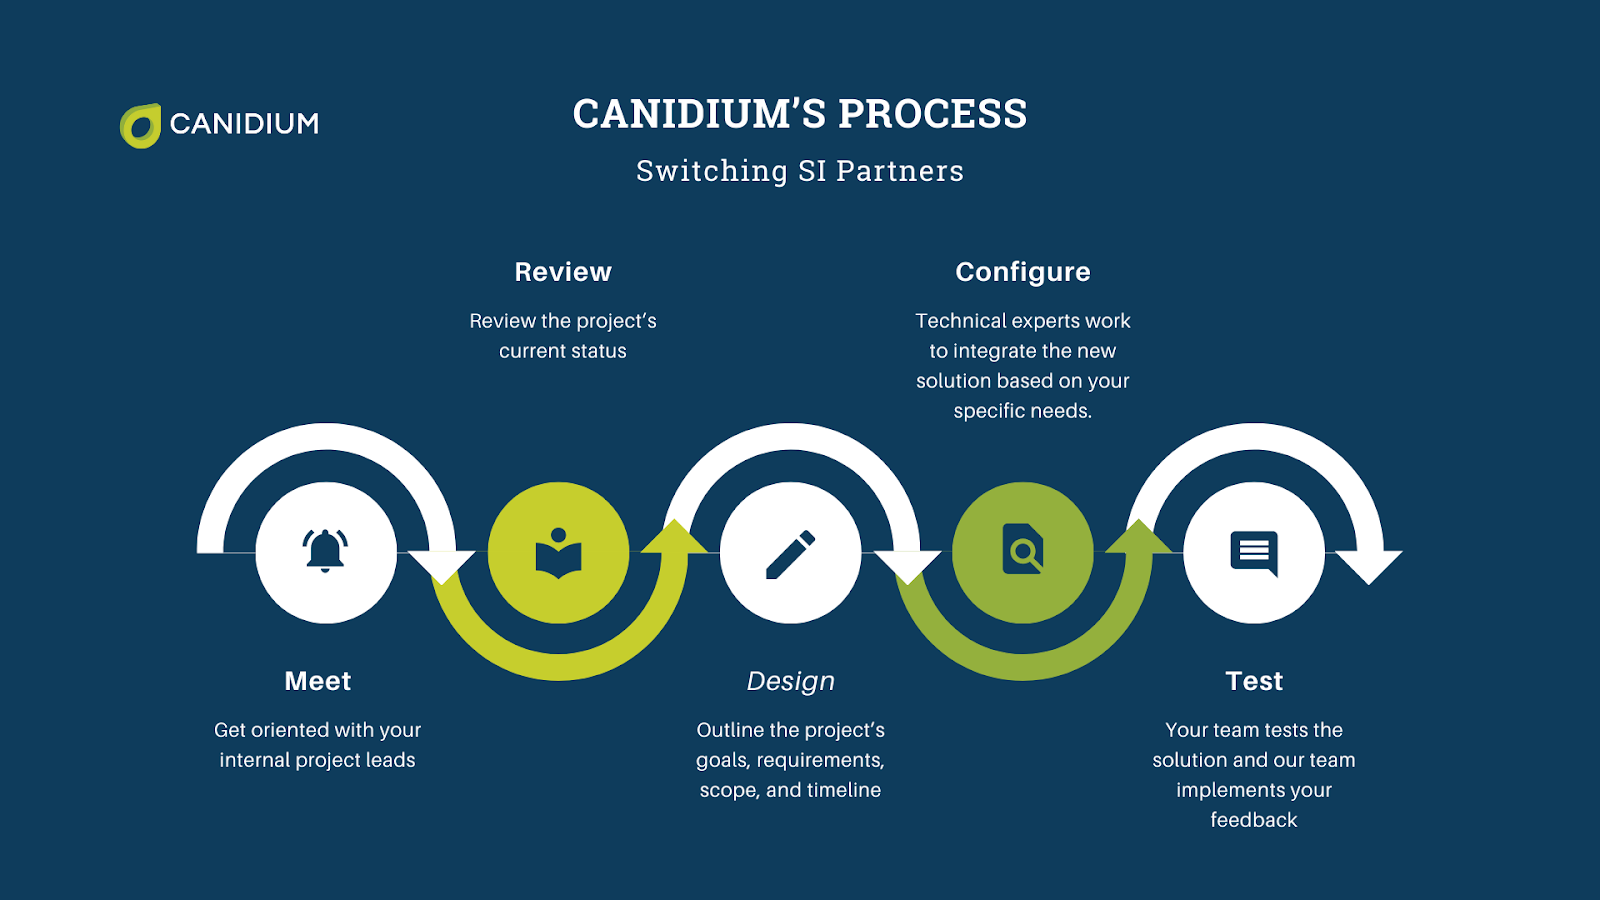 Five step process of switching SI partners